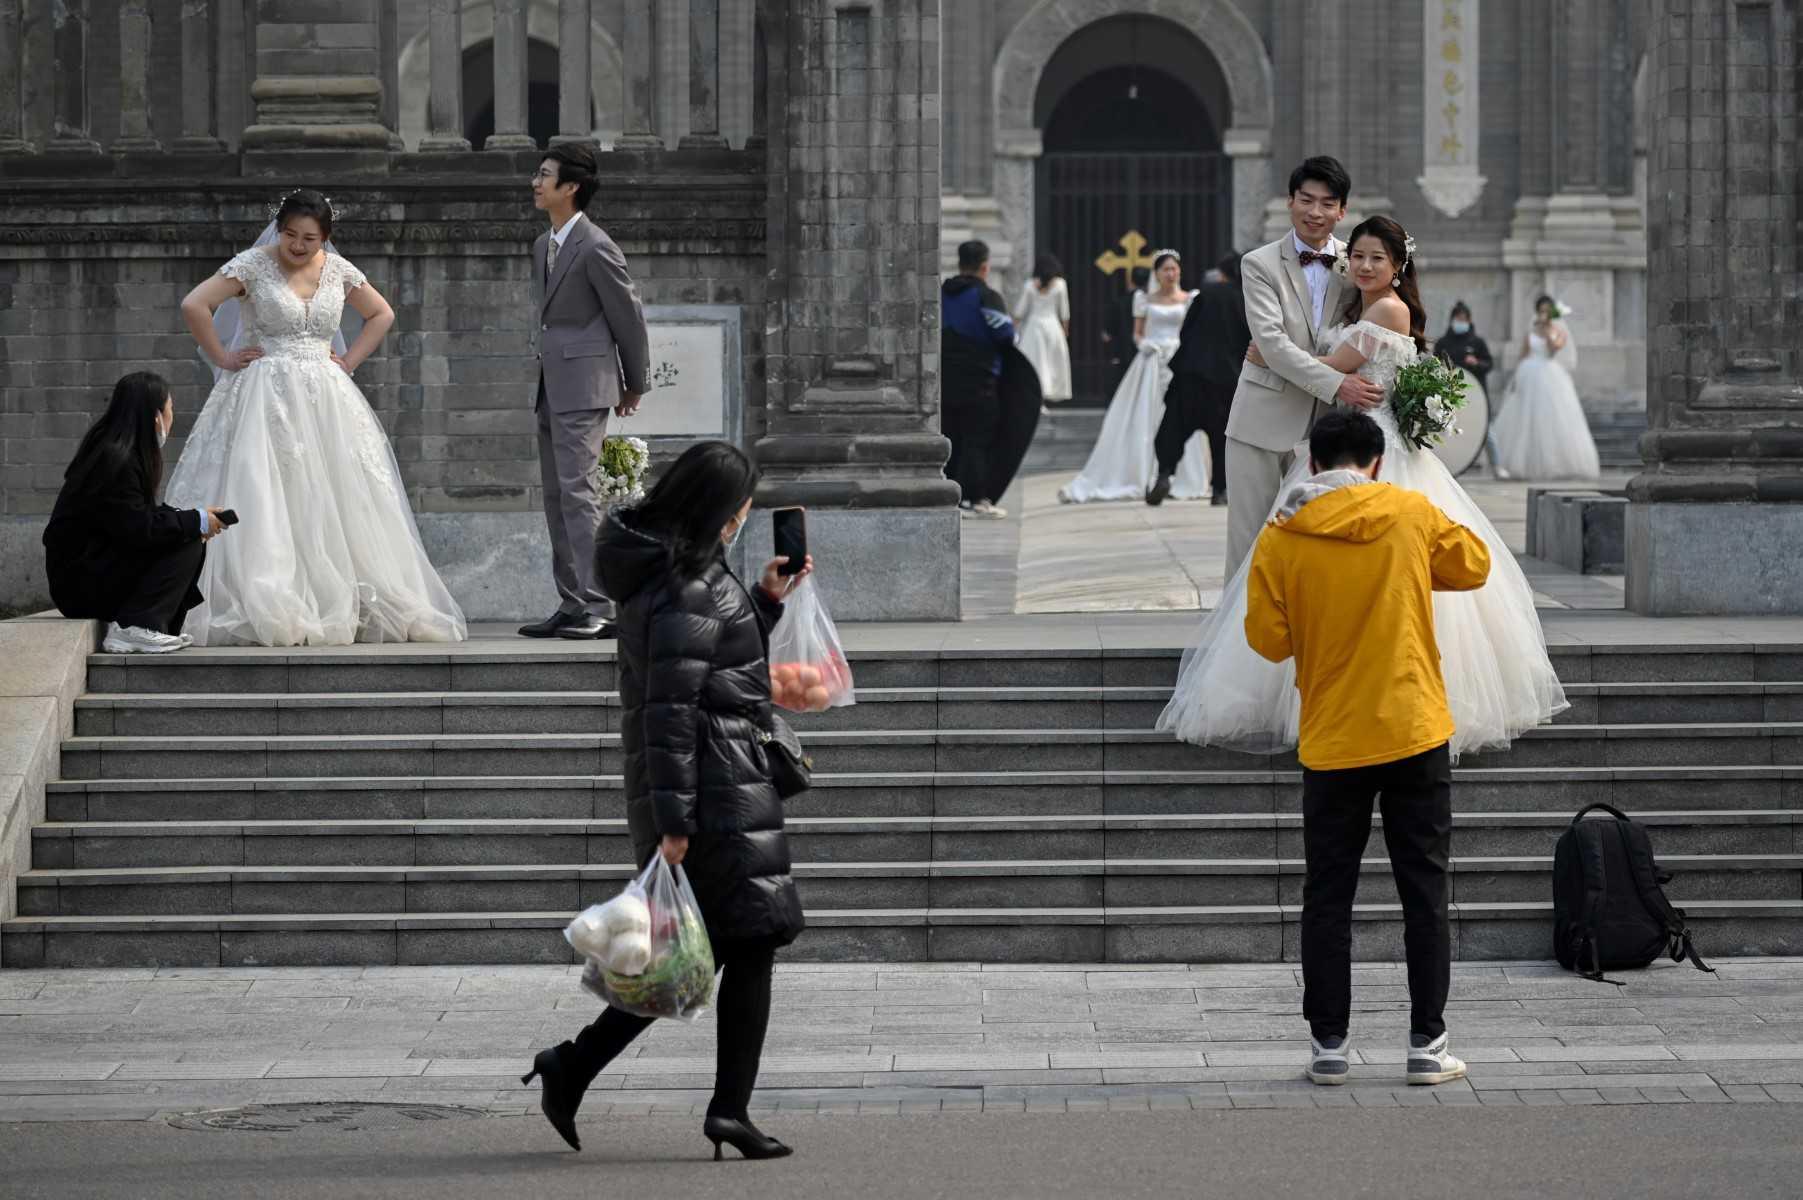 A woman uses her mobile phone to take a picture while walking past a group of couples taking wedding pictures in front of a church in Beijing on March 11, 2021. Photo: AFP 